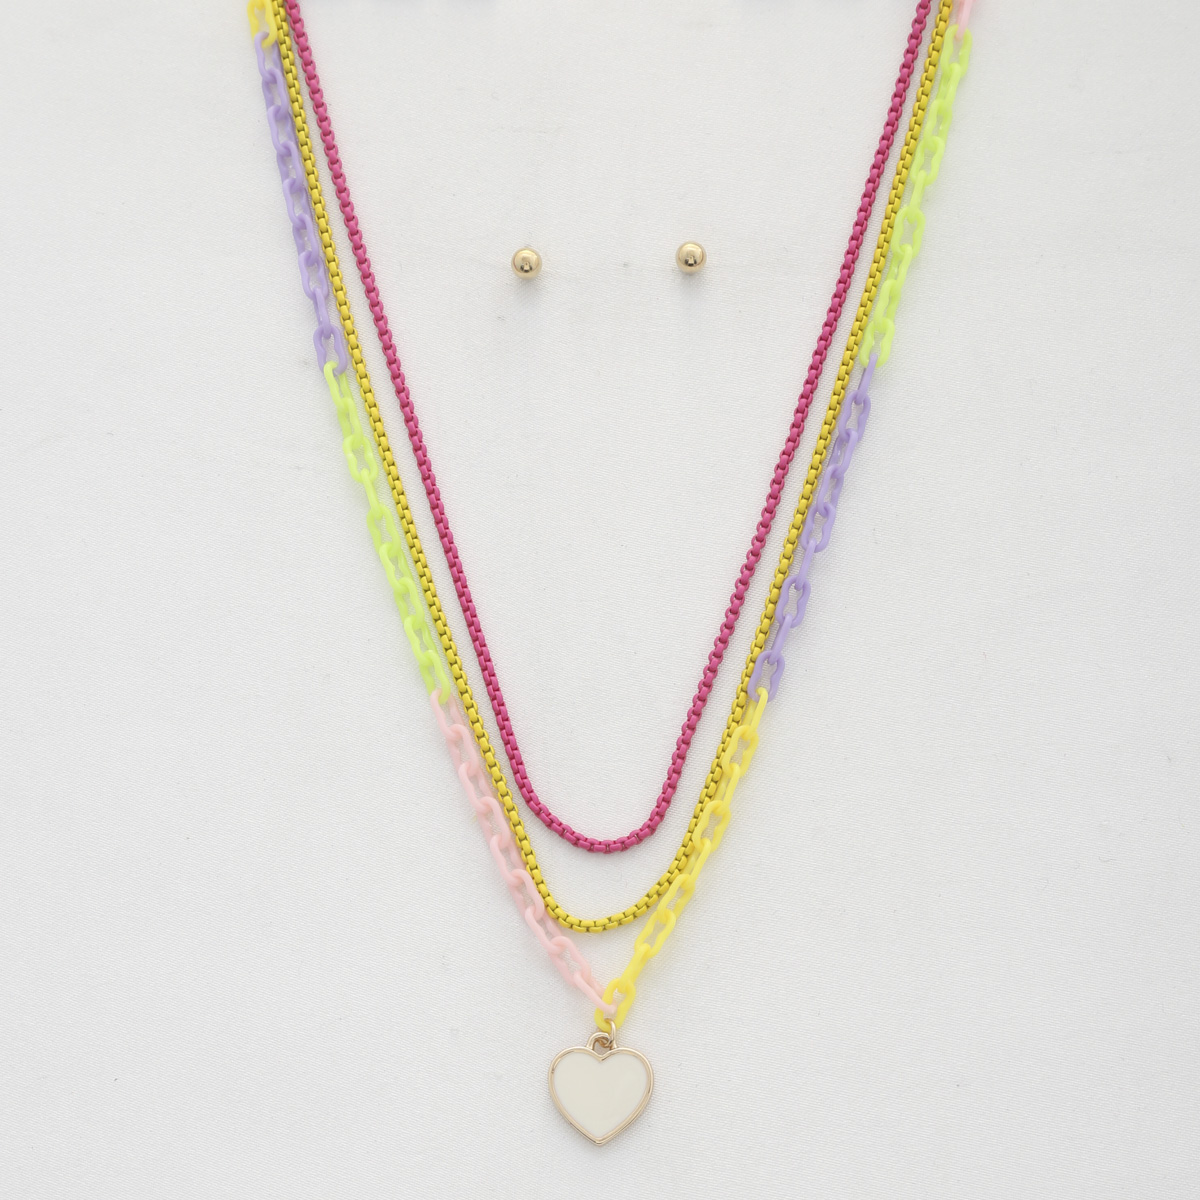 HEART CHARM OVAL LINK LAYERED NECKLACE